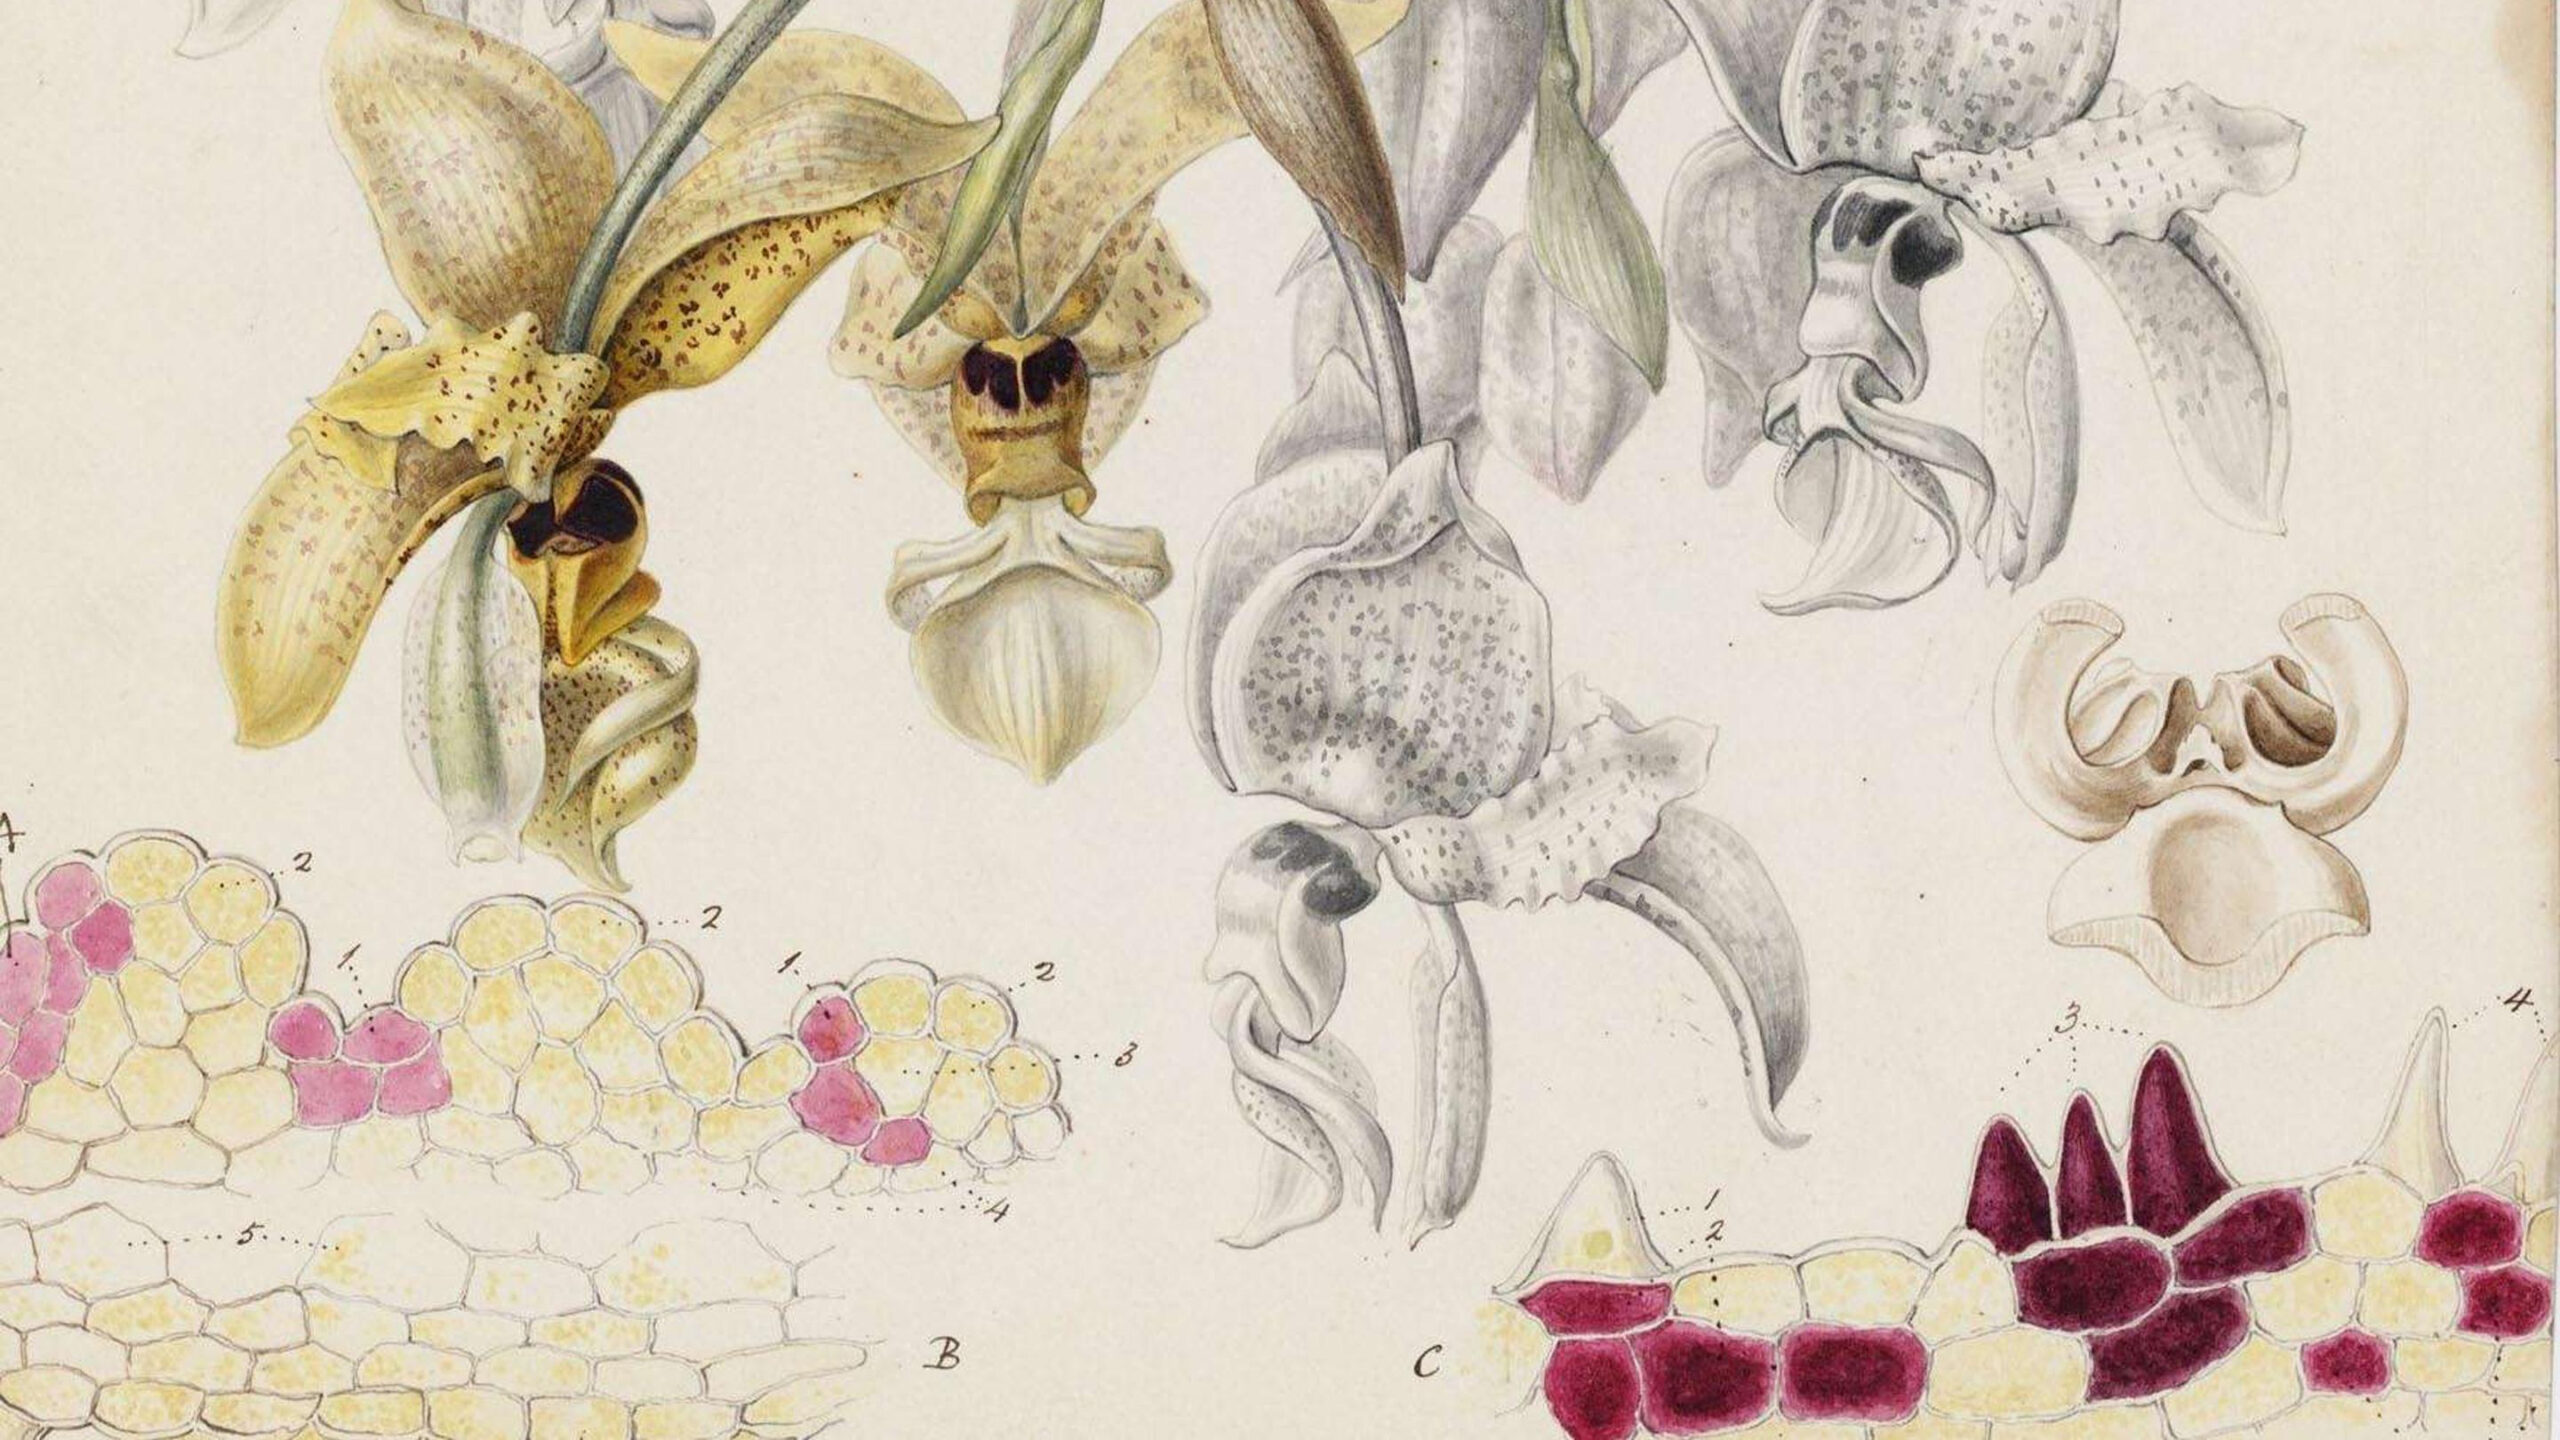 Women Who Transformed The World Of Plants And Fungi | Kew pertaining to Kew Book Of Botanical Illustration